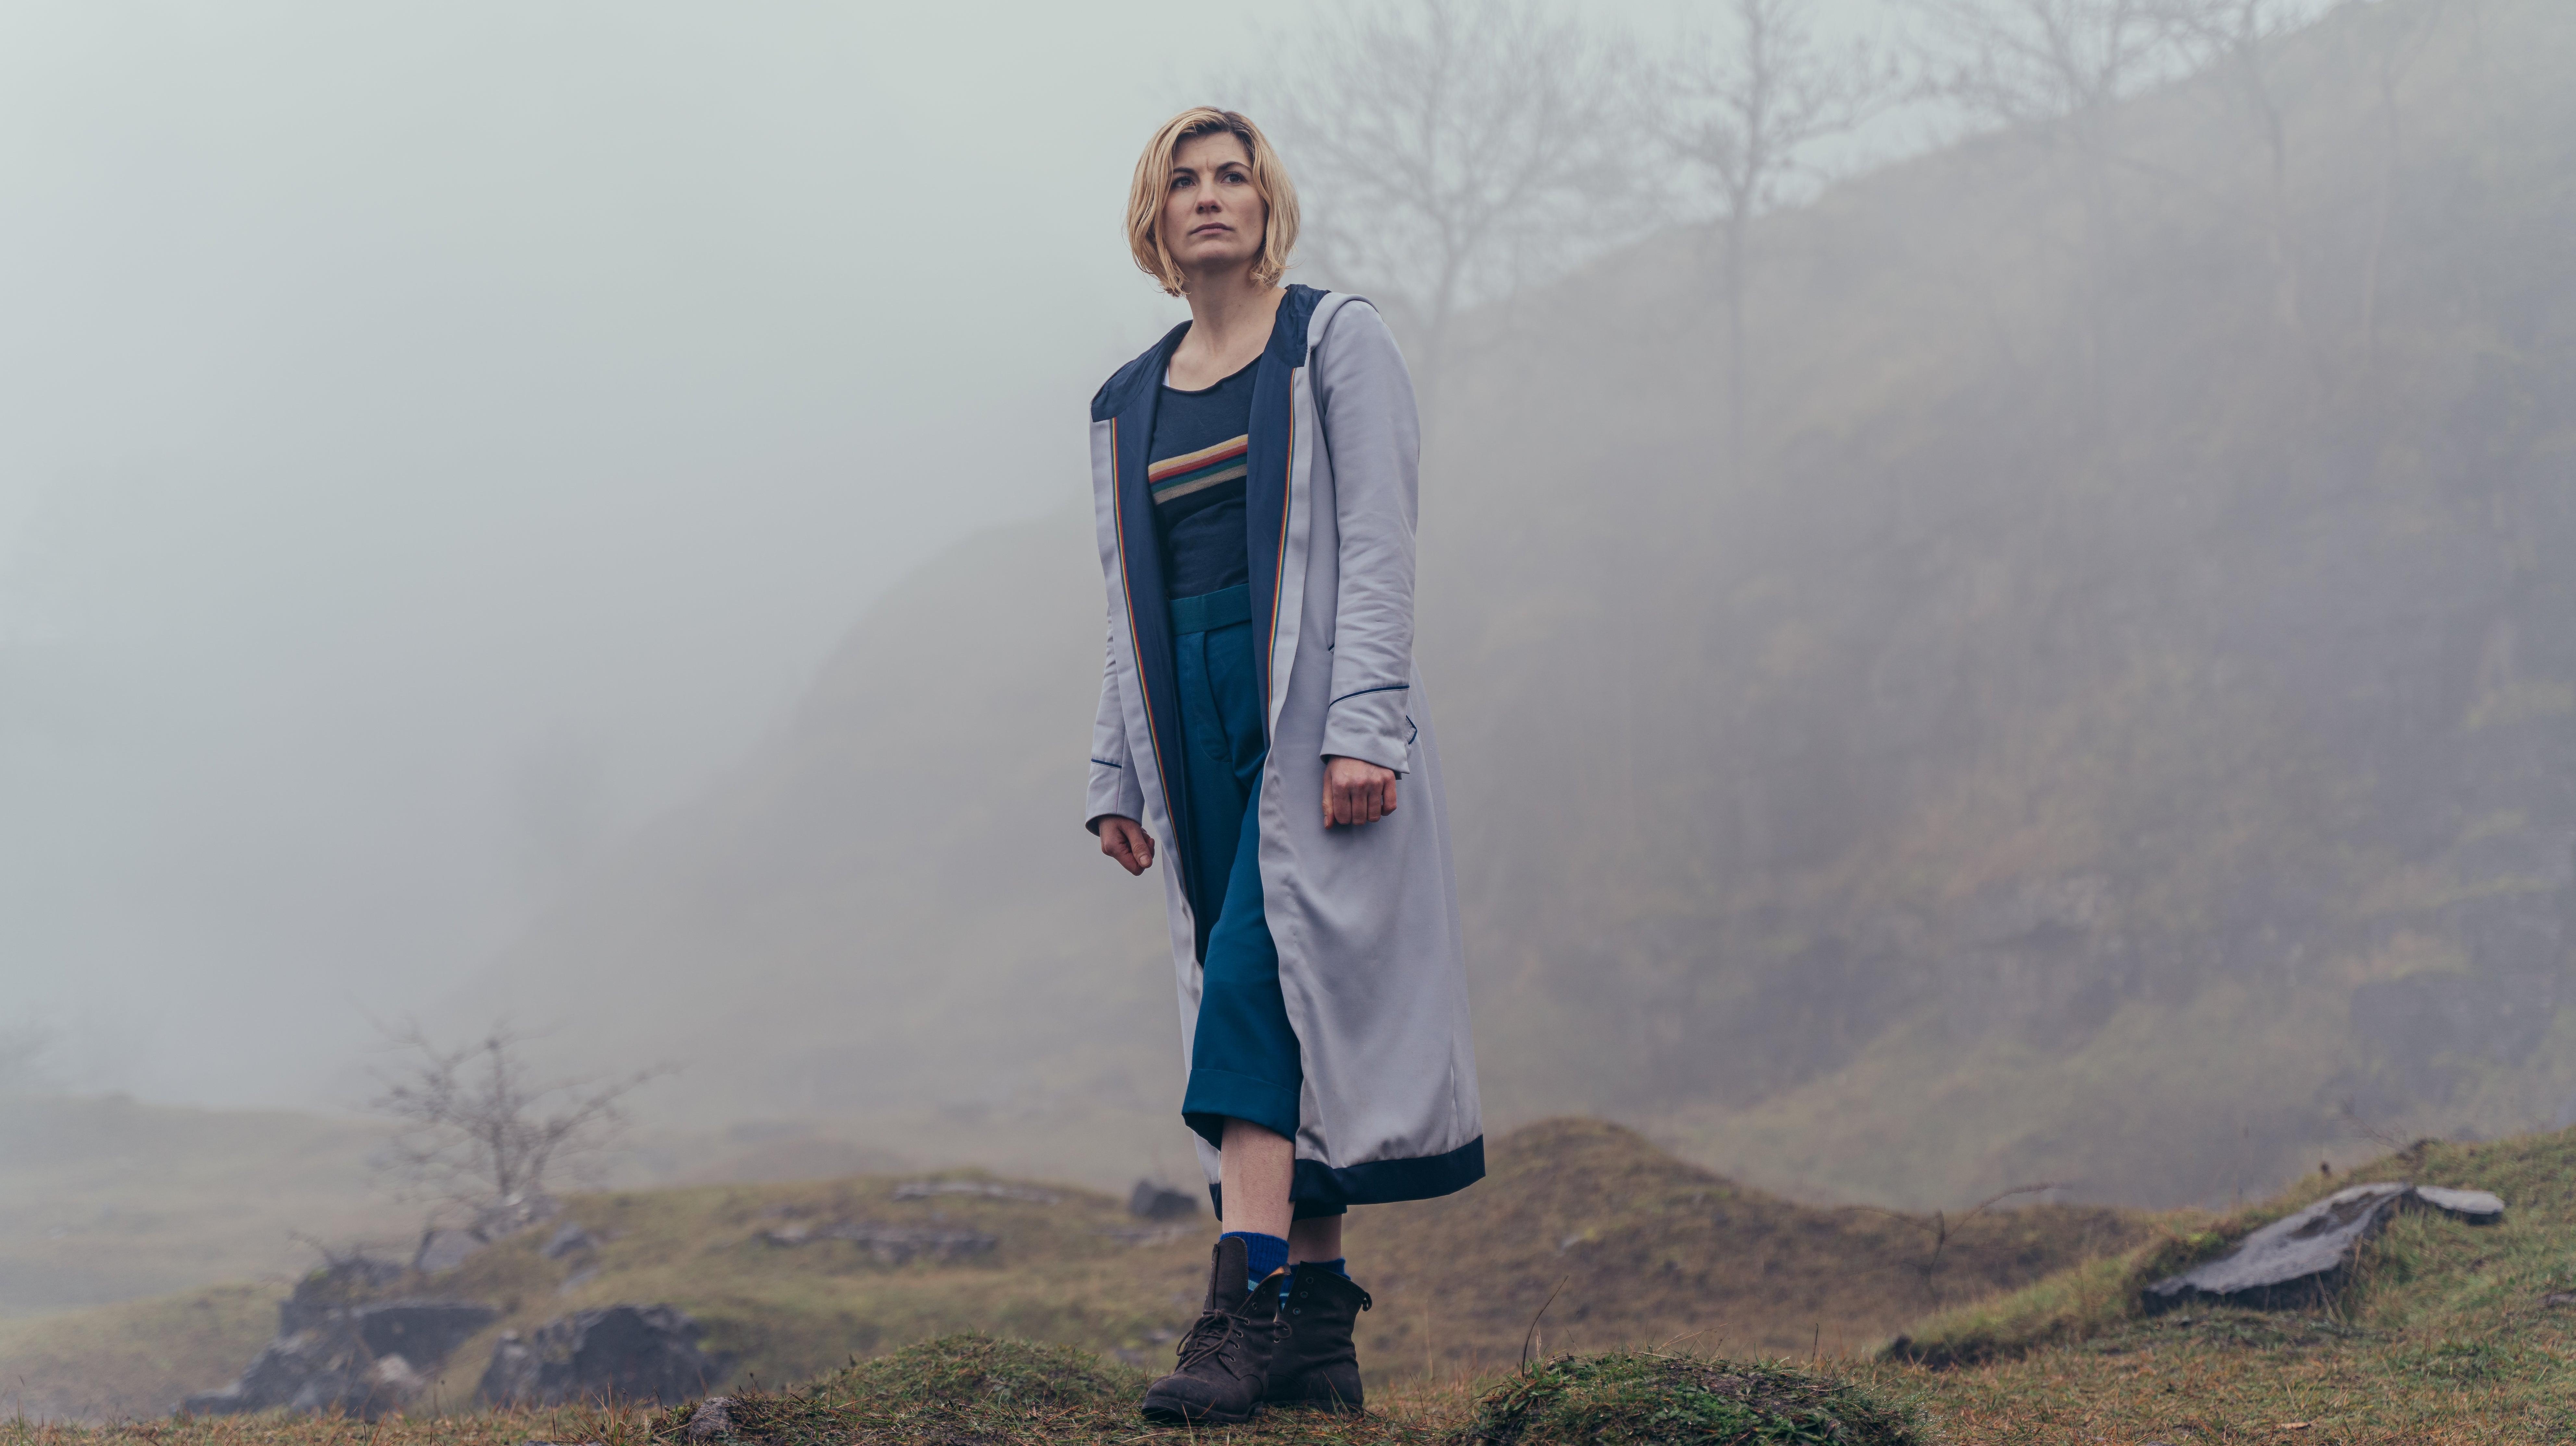 Doctor Who: Flux comes to its fiery conclusion